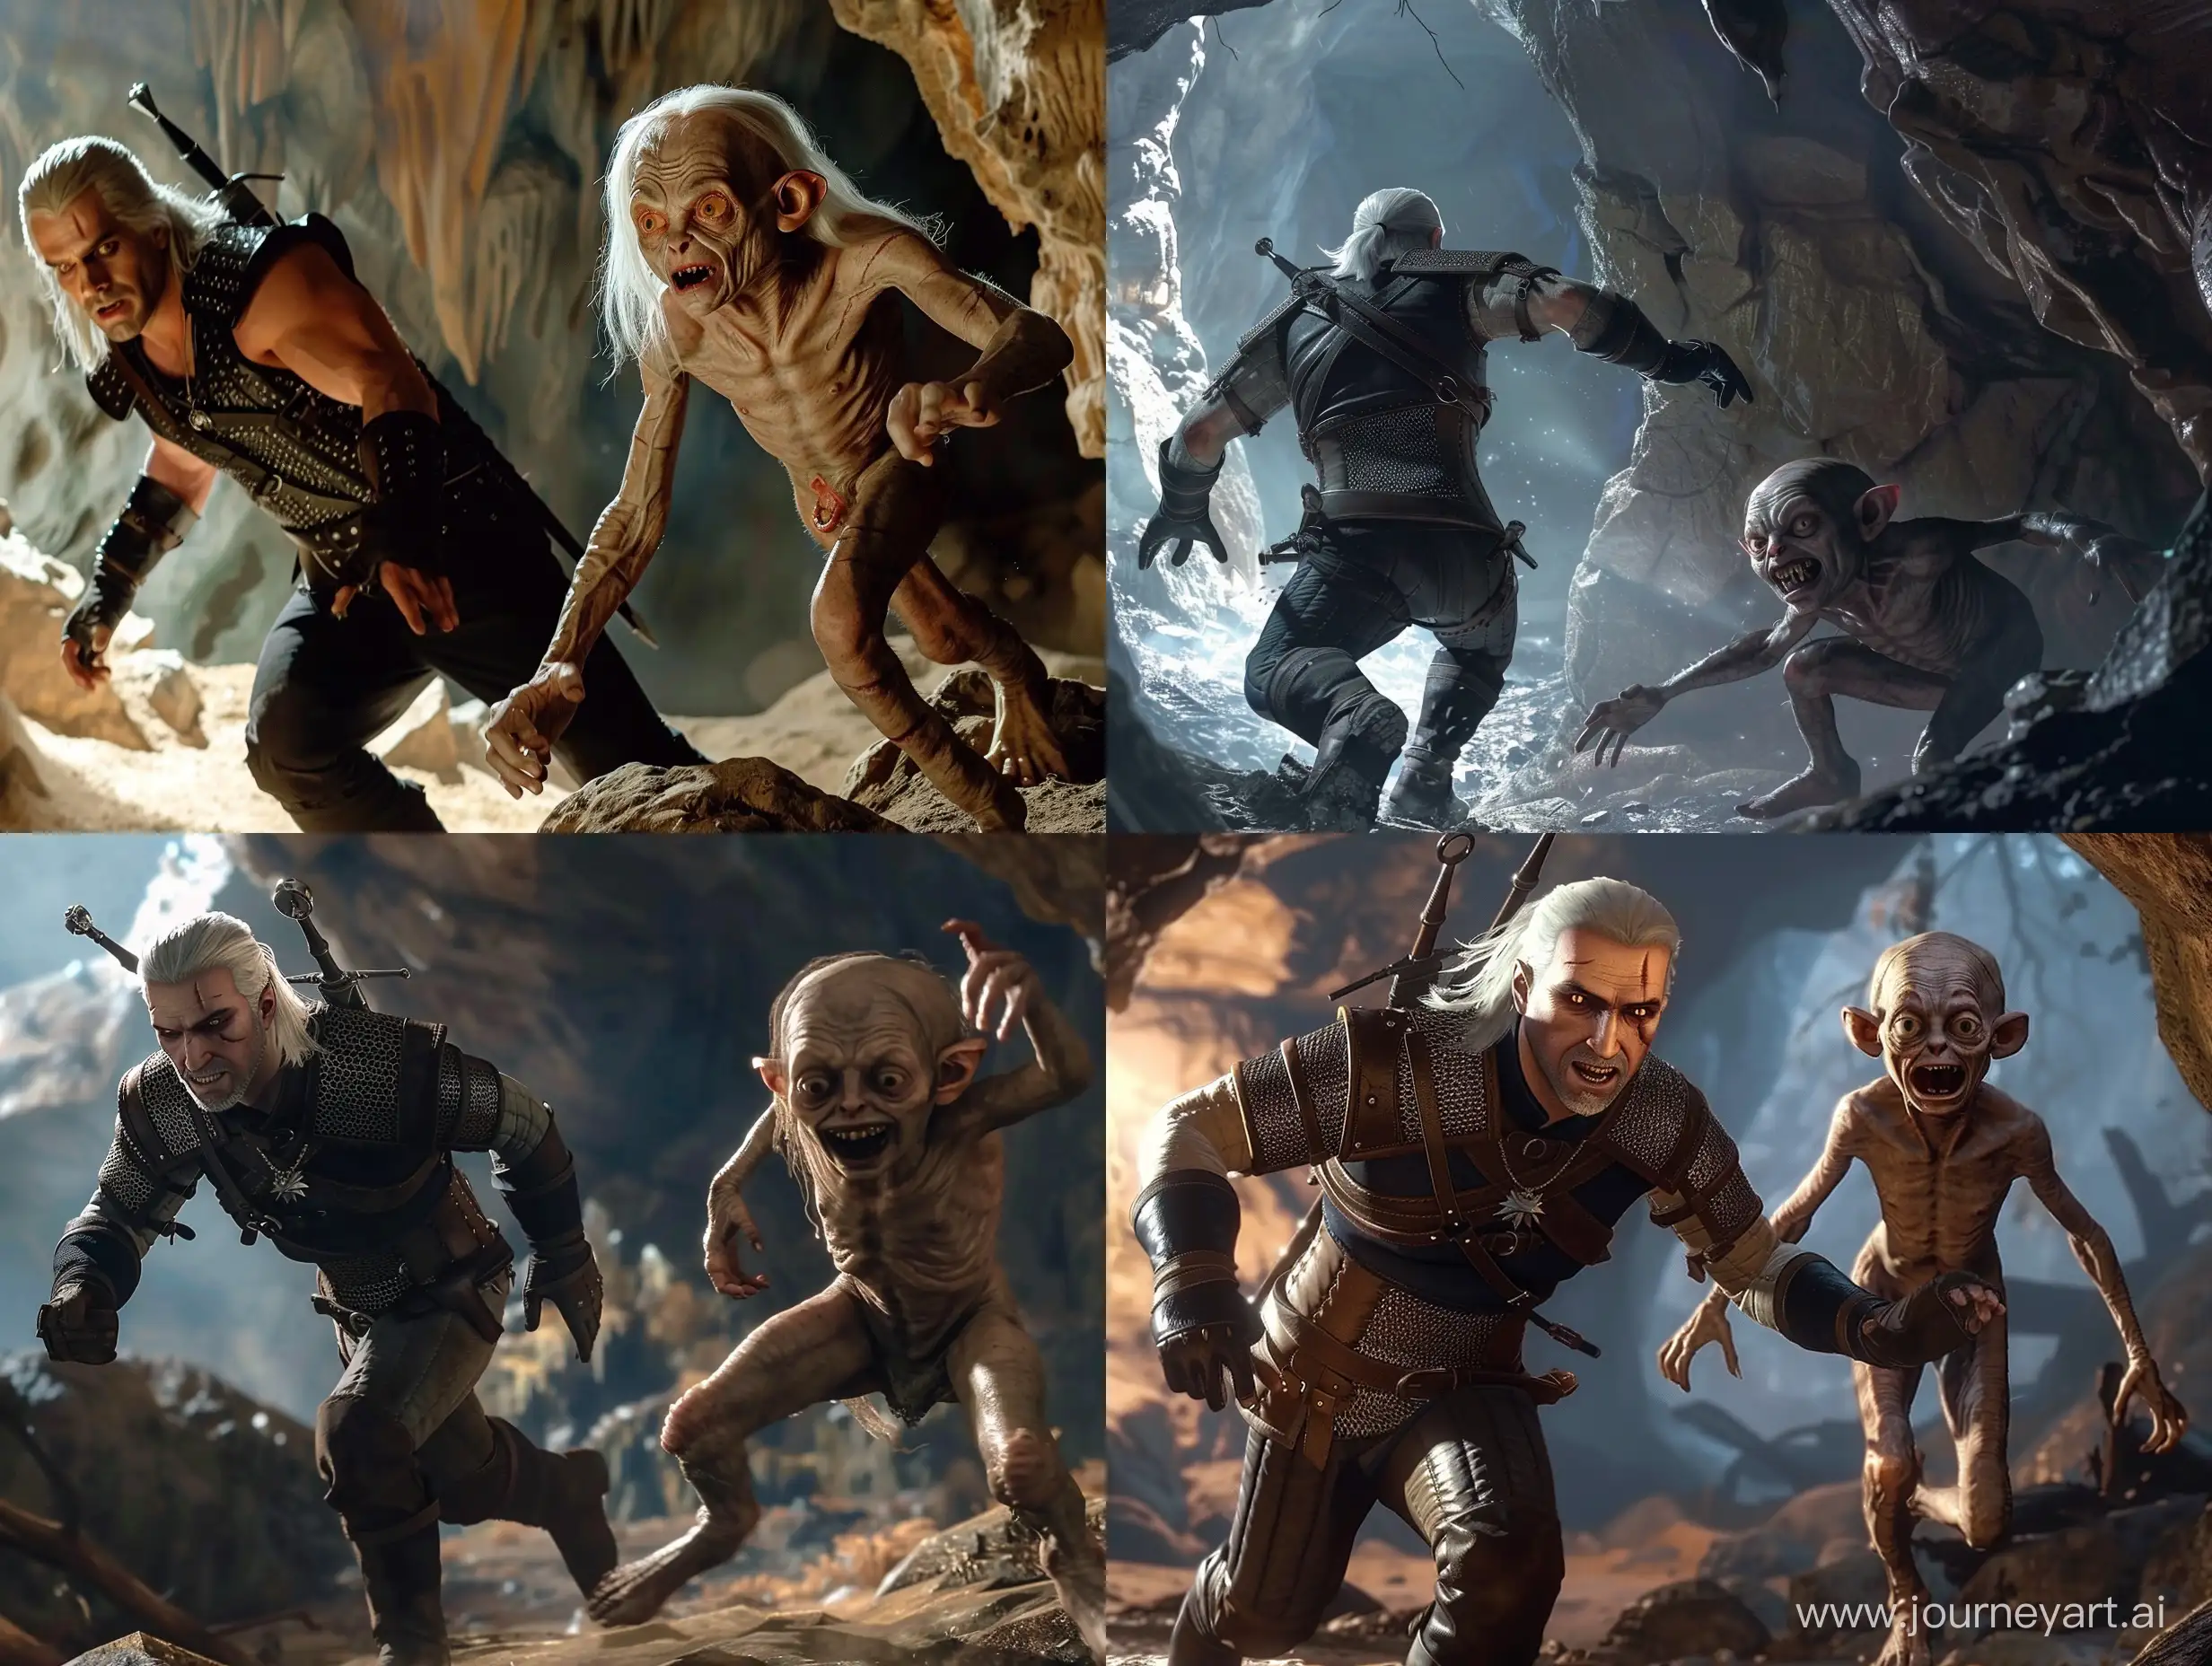 The Witcher 3 style, Geralt of Rivia runs after Gollum in a cave, Gollum holds a ring, Lord of the Rings style